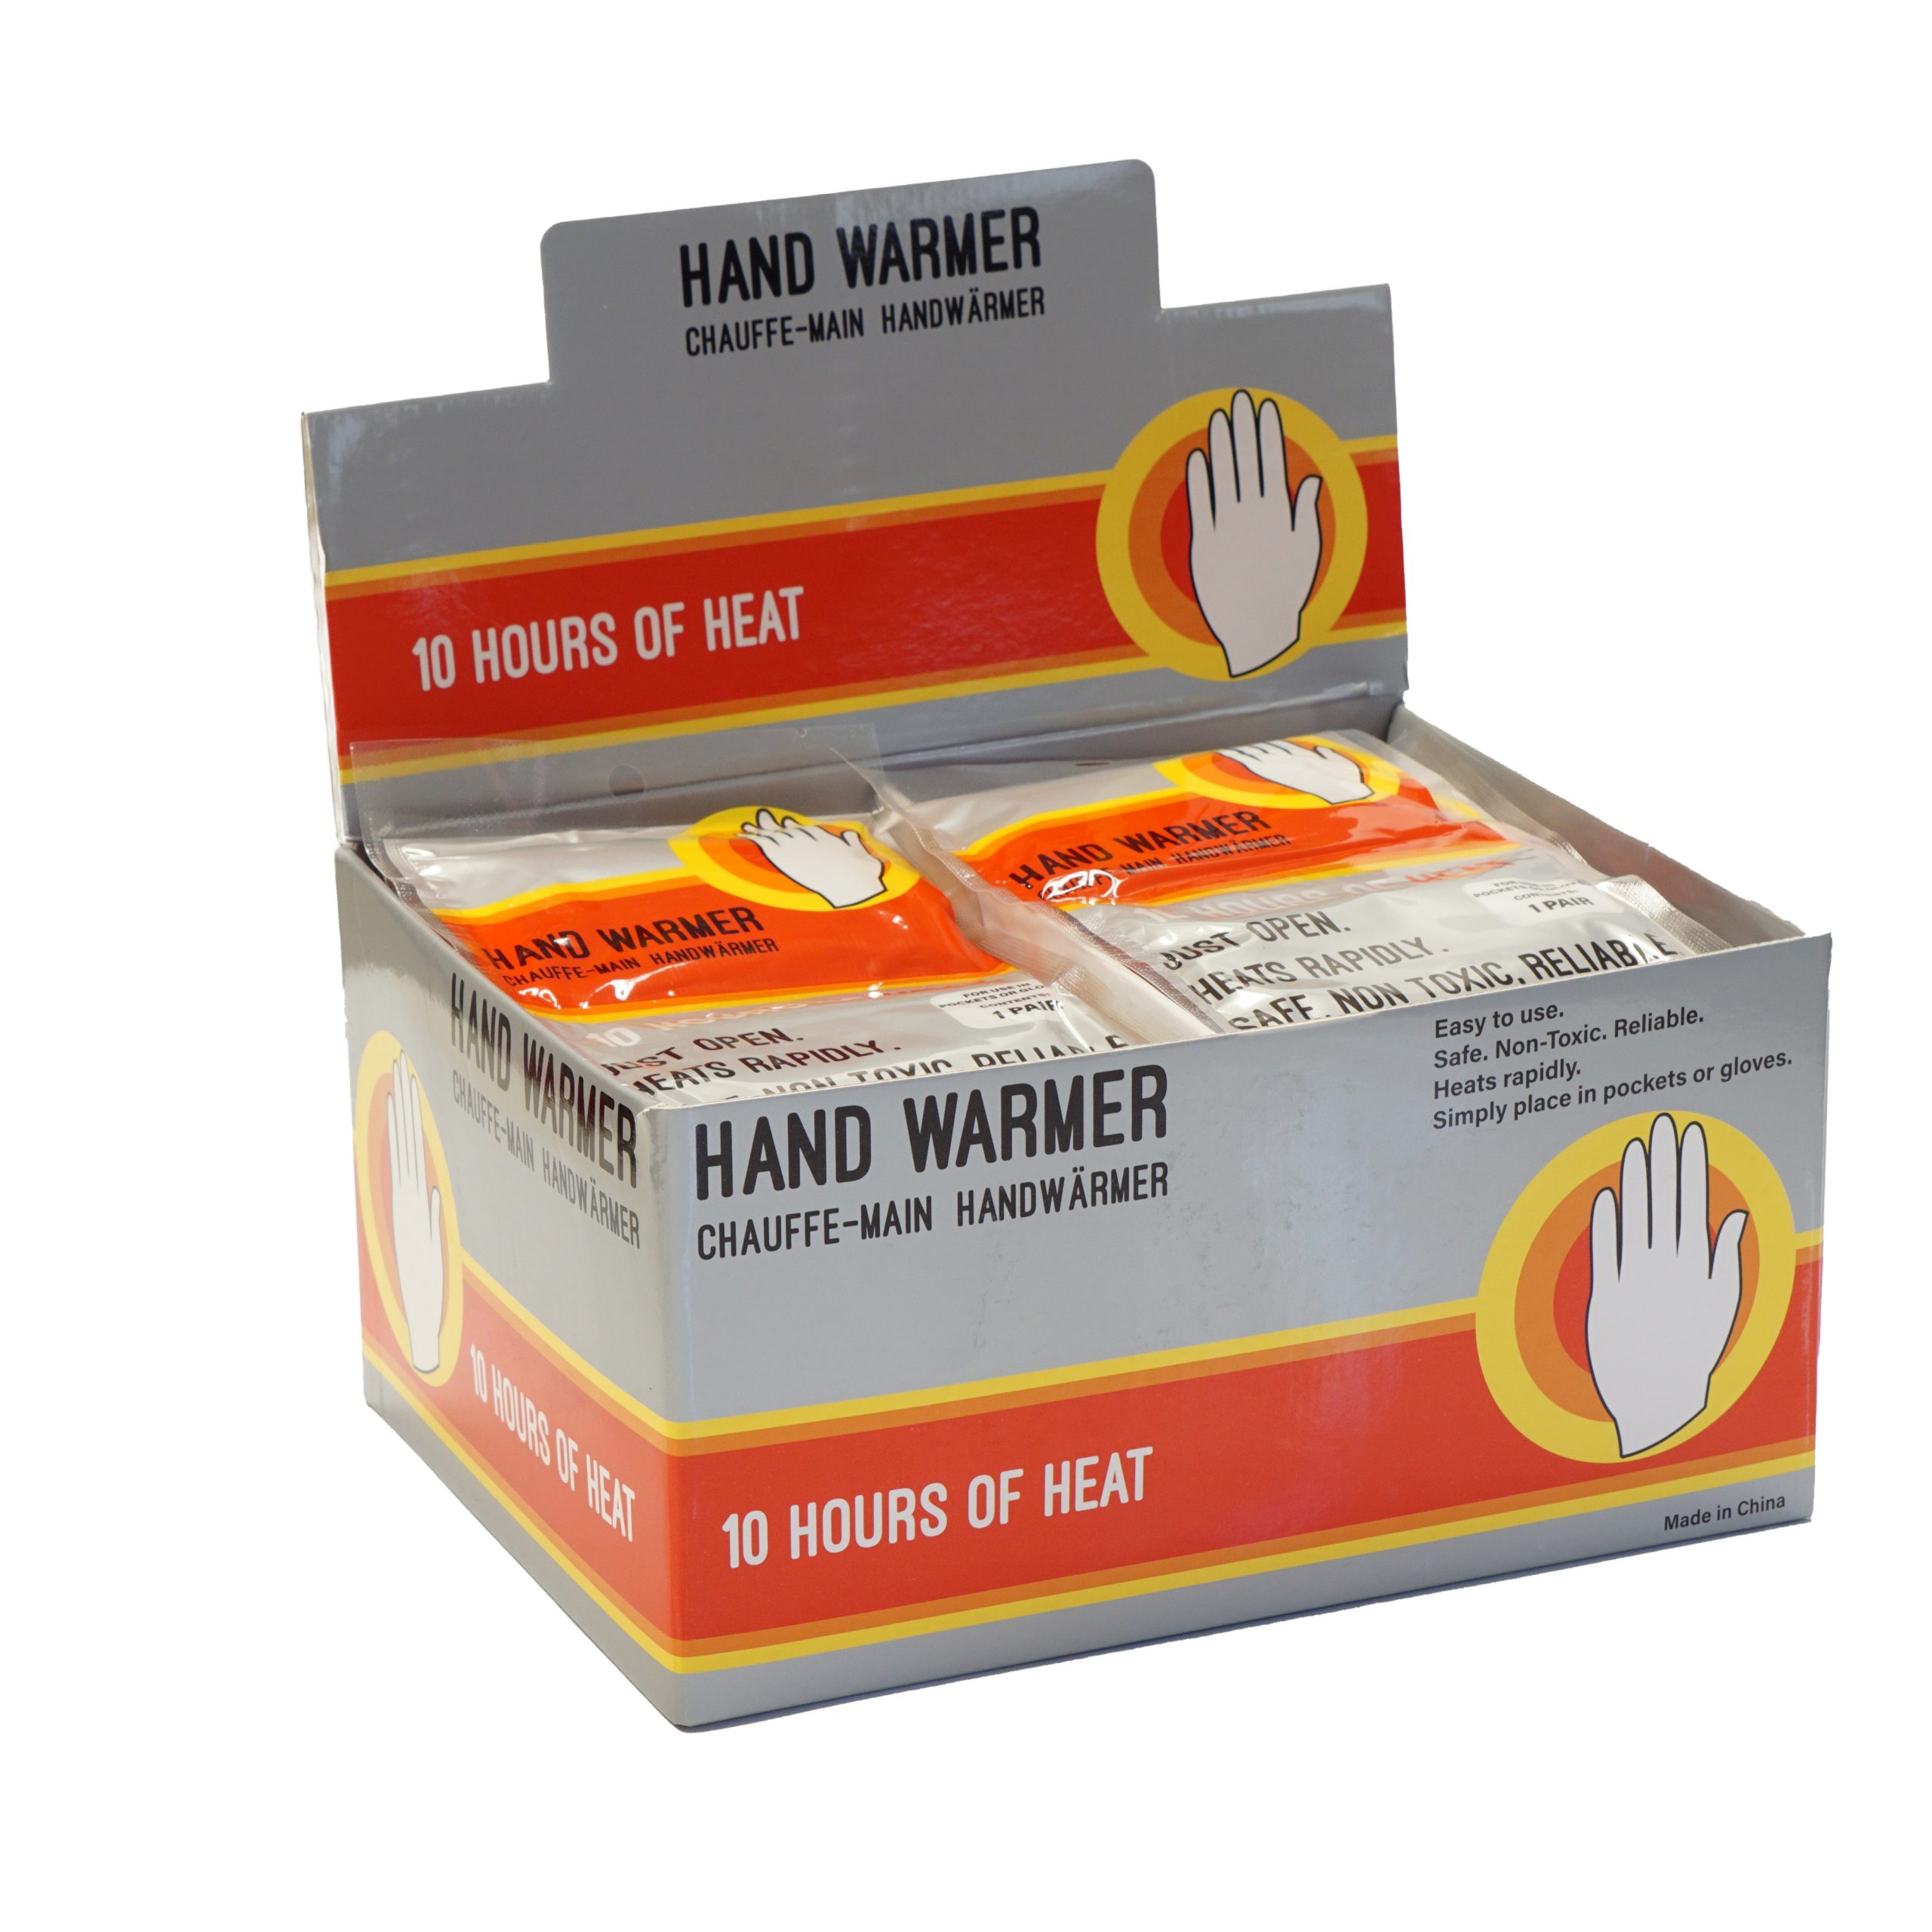 LUXEHOME 80-pack Adhesive Hand Warmers 8 Hours of Heat 